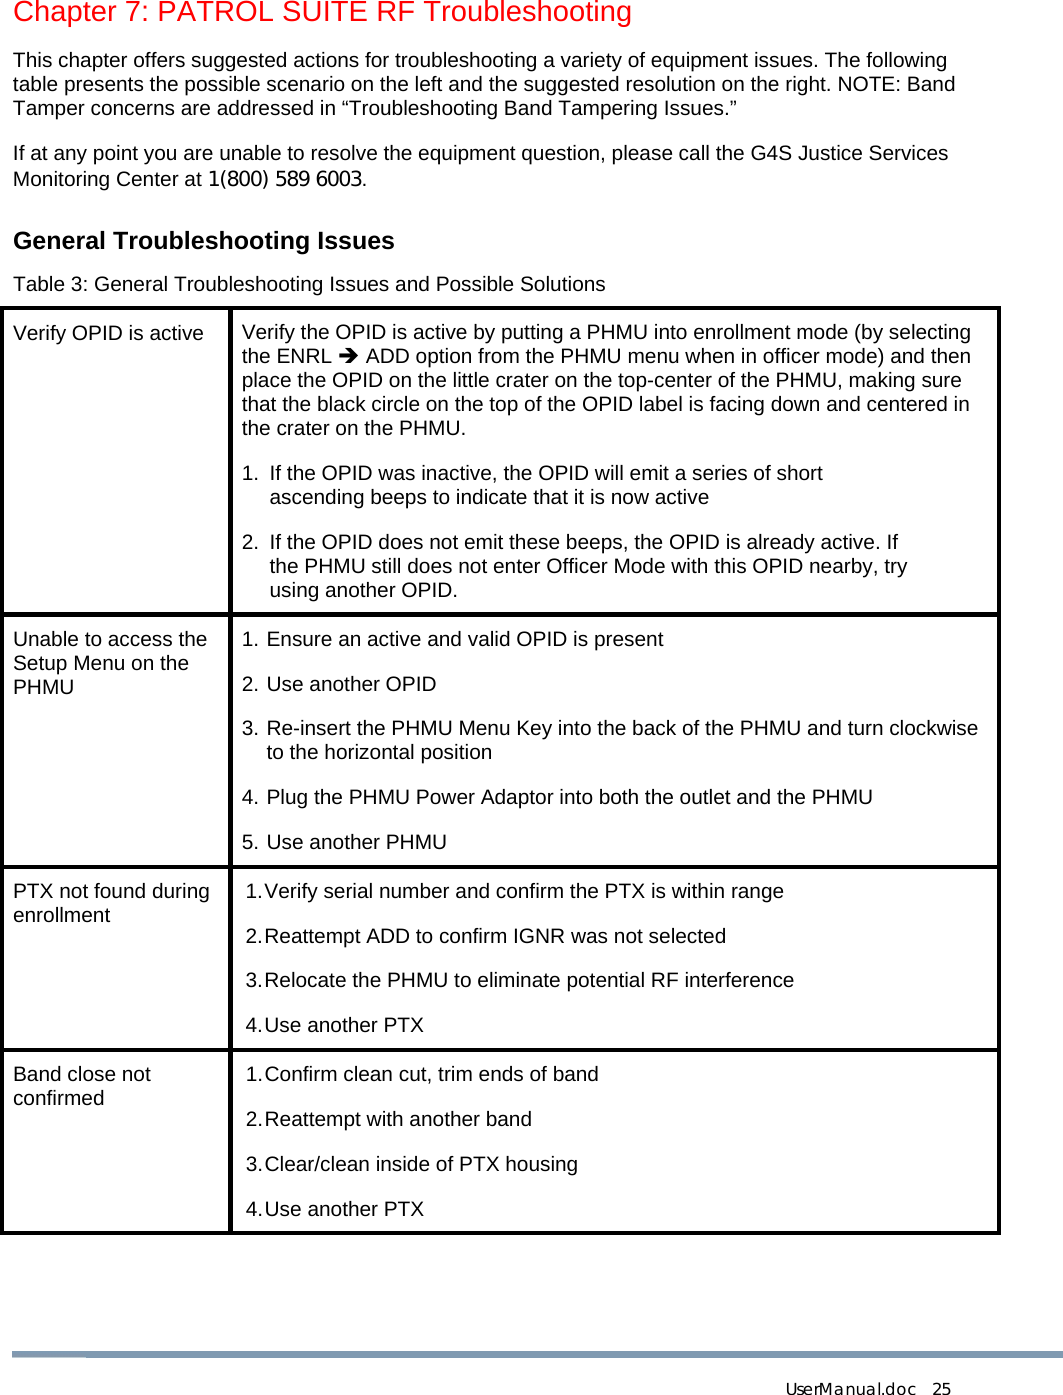  UserManual.doc   25 Chapter 7: PATROL SUITE RF Troubleshooting  This chapter offers suggested actions for troubleshooting a variety of equipment issues. The following table presents the possible scenario on the left and the suggested resolution on the right. NOTE: Band Tamper concerns are addressed in “Troubleshooting Band Tampering Issues.” If at any point you are unable to resolve the equipment question, please call the G4S Justice Services Monitoring Center at 1(800) 589 6003.  General Troubleshooting Issues  Table 3: General Troubleshooting Issues and Possible Solutions  Verify OPID is active  Verify the OPID is active by putting a PHMU into enrollment mode (by selecting the ENRL Î ADD option from the PHMU menu when in officer mode) and then place the OPID on the little crater on the top-center of the PHMU, making sure that the black circle on the top of the OPID label is facing down and centered in the crater on the PHMU.  1.  If the OPID was inactive, the OPID will emit a series of short ascending beeps to indicate that it is now active  2.  If the OPID does not emit these beeps, the OPID is already active. If the PHMU still does not enter Officer Mode with this OPID nearby, try using another OPID.   Unable to access the Setup Menu on the PHMU 1. Ensure an active and valid OPID is present 2. Use another OPID 3. Re-insert the PHMU Menu Key into the back of the PHMU and turn clockwise to the horizontal position 4. Plug the PHMU Power Adaptor into both the outlet and the PHMU 5. Use another PHMU PTX not found during enrollment  1. Verify serial number and confirm the PTX is within range 2. Reattempt ADD to confirm IGNR was not selected 3. Relocate the PHMU to eliminate potential RF interference 4. Use  another  PTX Band close not confirmed  1. Confirm clean cut, trim ends of band 2. Reattempt with another band 3. Clear/clean inside of PTX housing 4. Use  another  PTX 